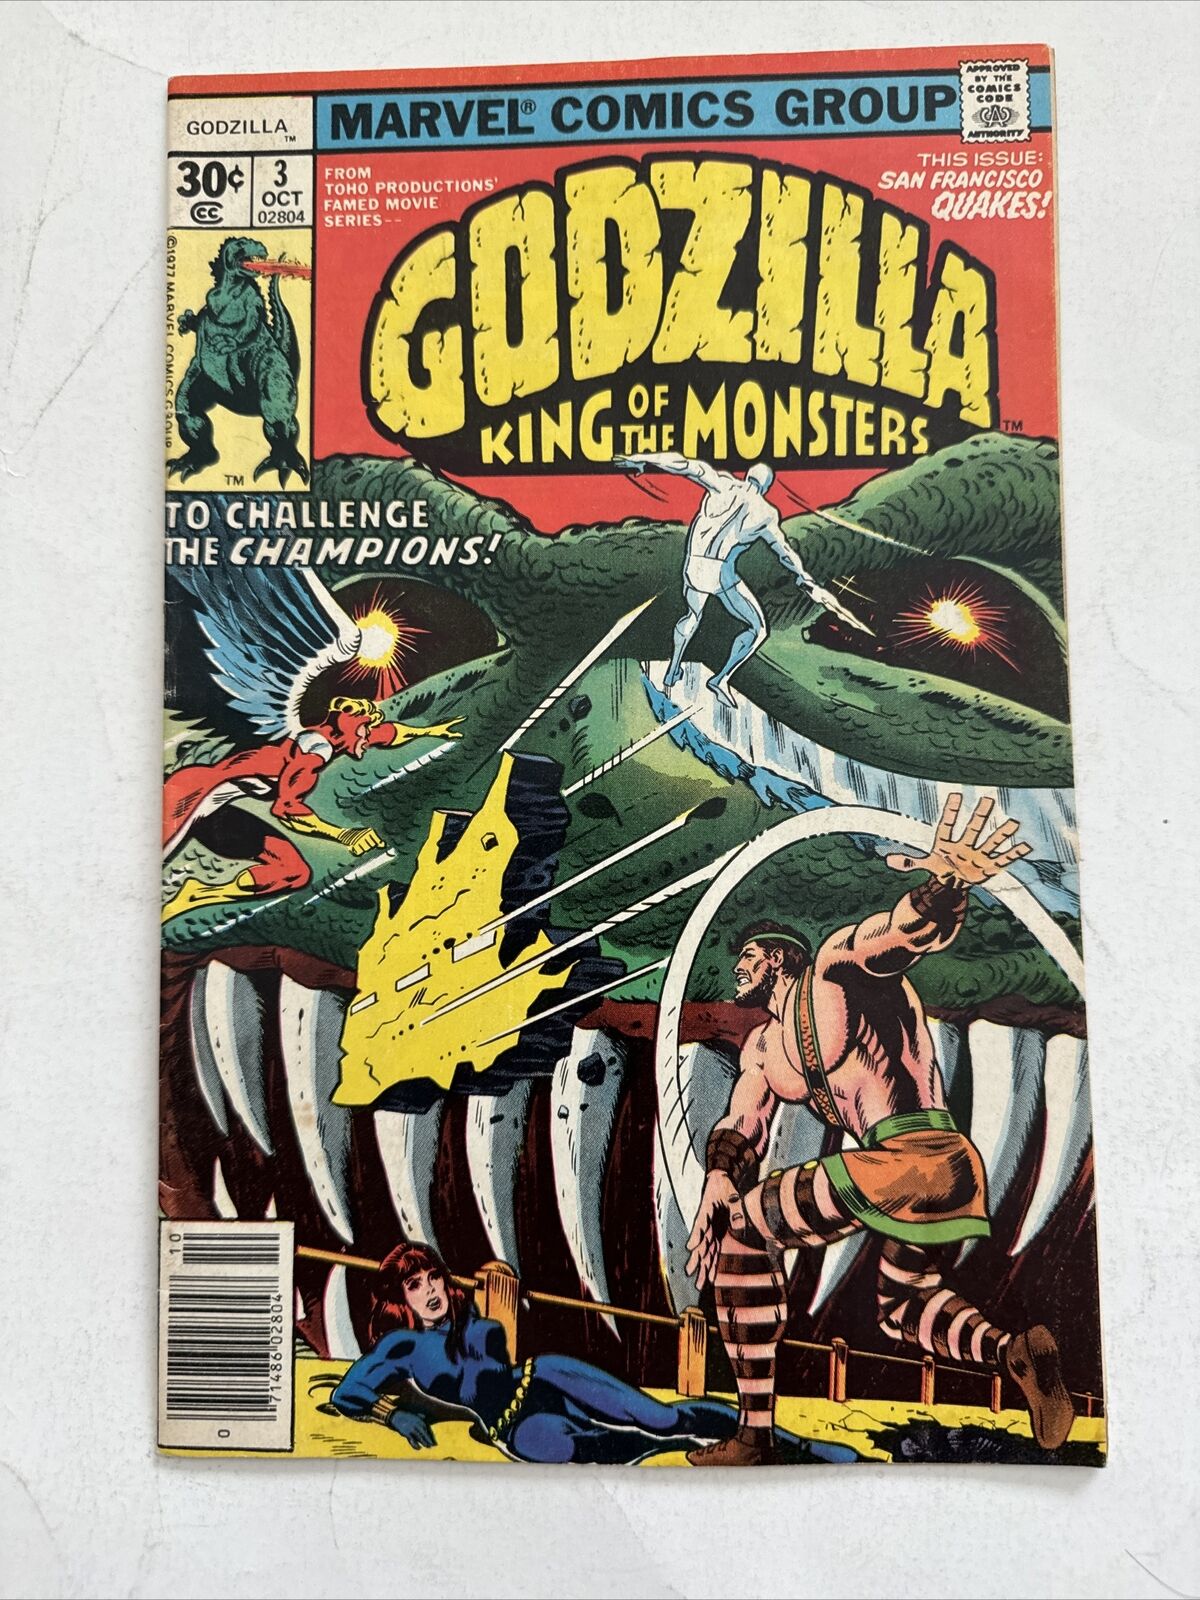 GODZILLA King of the Monsters # 3  Marvel Comic 1977 SILVER SURFER FLASH